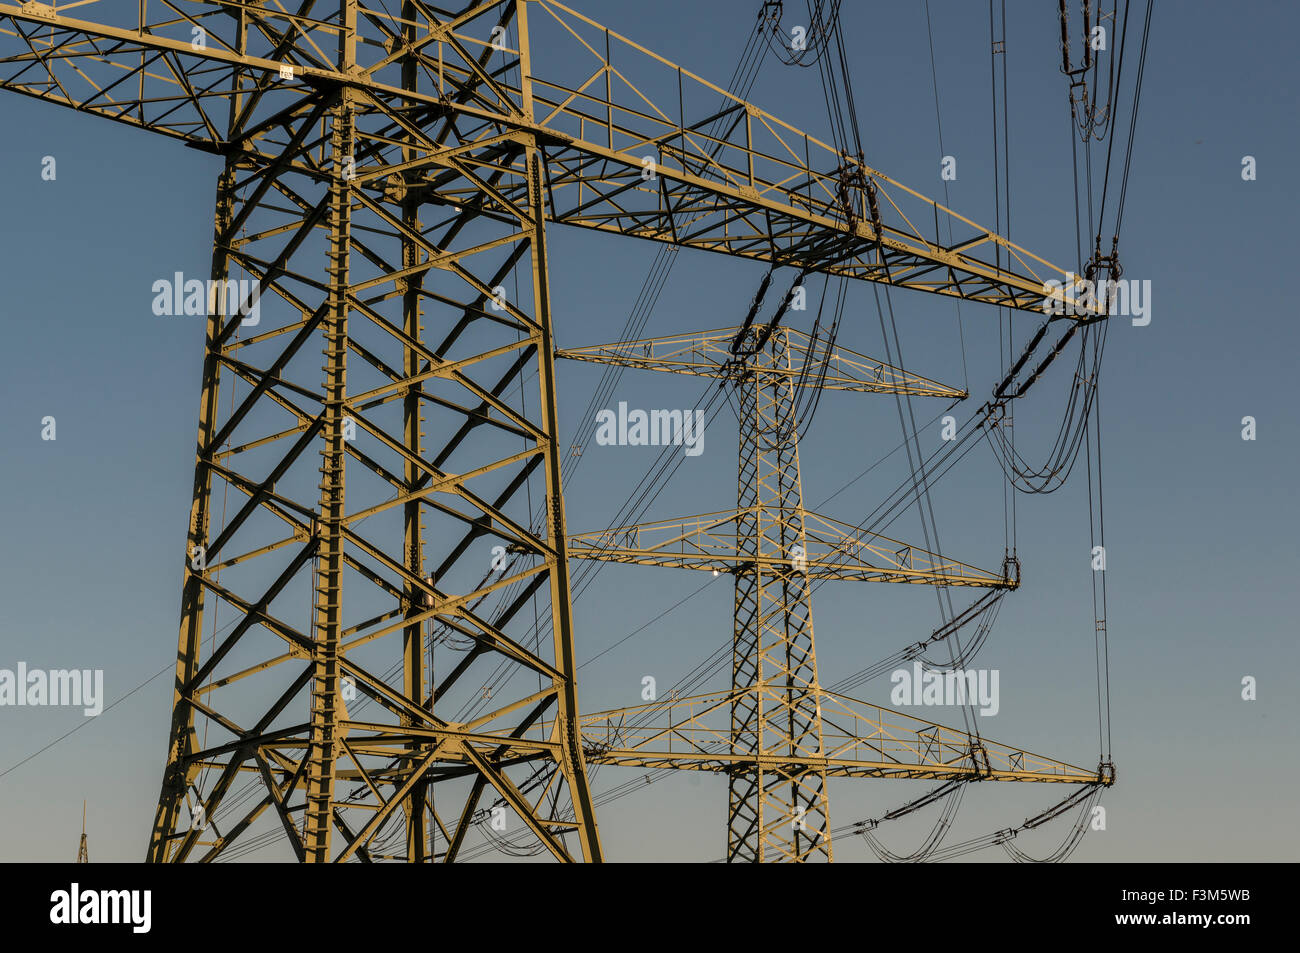 Overhead powerline in front of blue sky Stock Photo